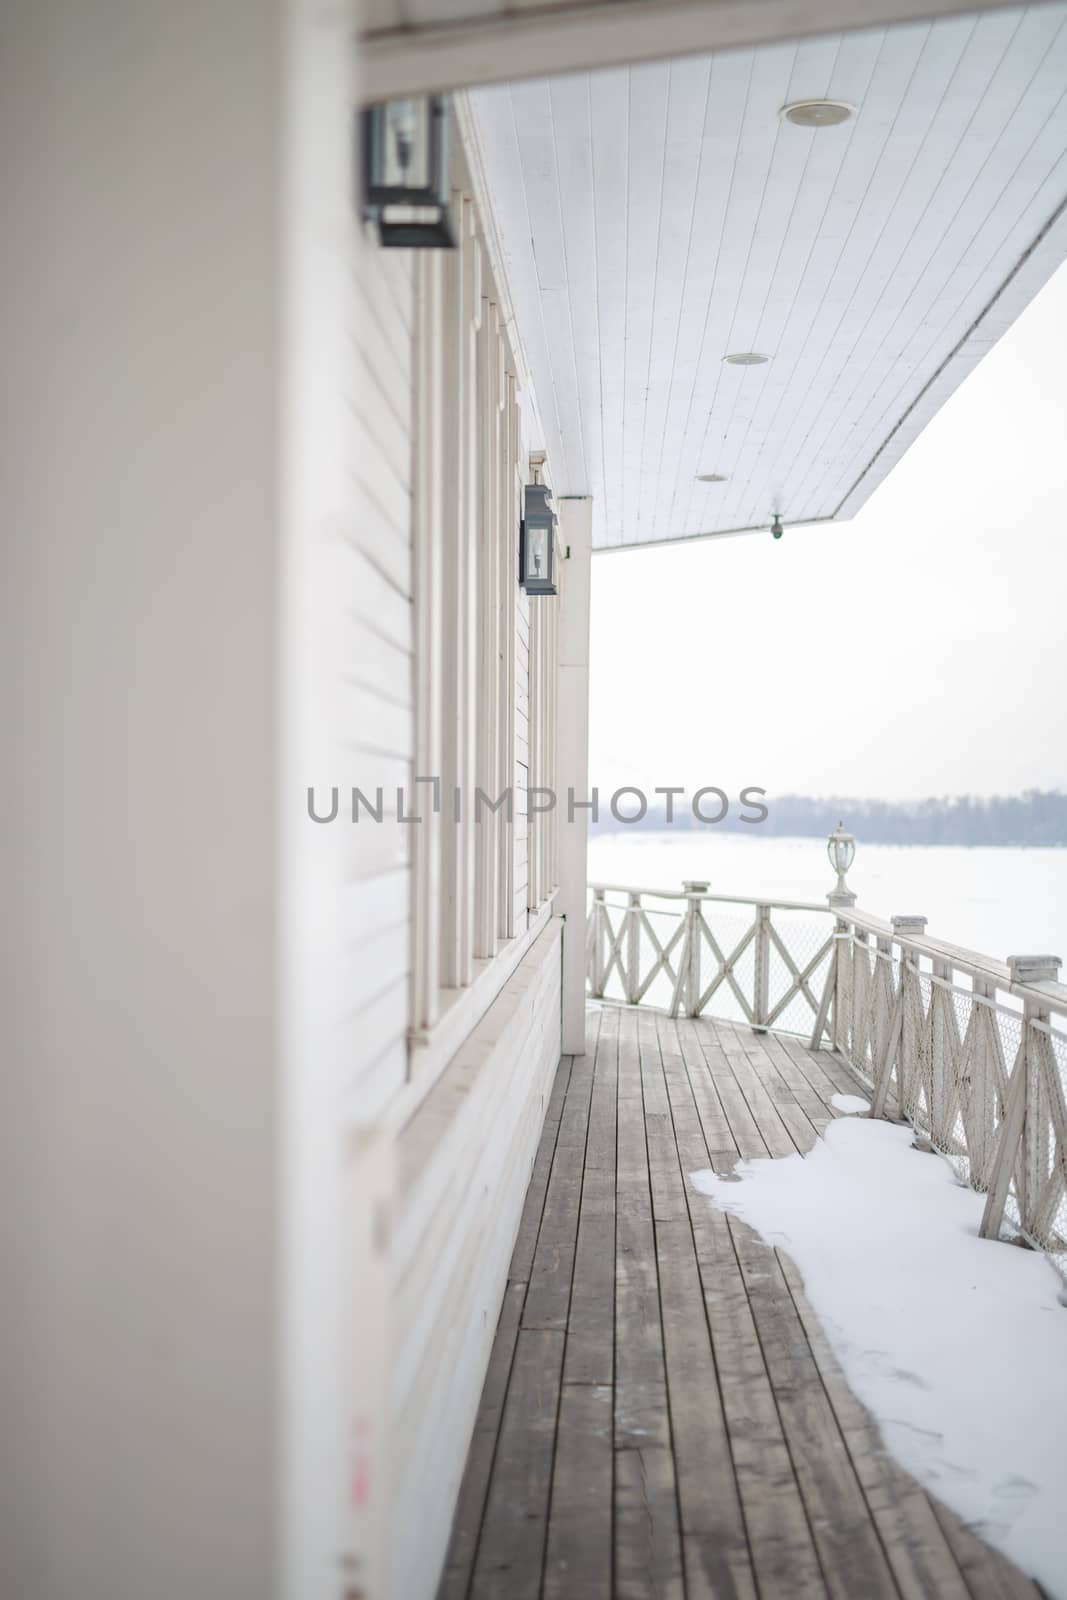 white snow on the wooden vintage open deck, old peeling paint light milk color, steel and copper lanterns hanging on the wall, snowy winter, snow lies on the river and the far shore of the earth is vi